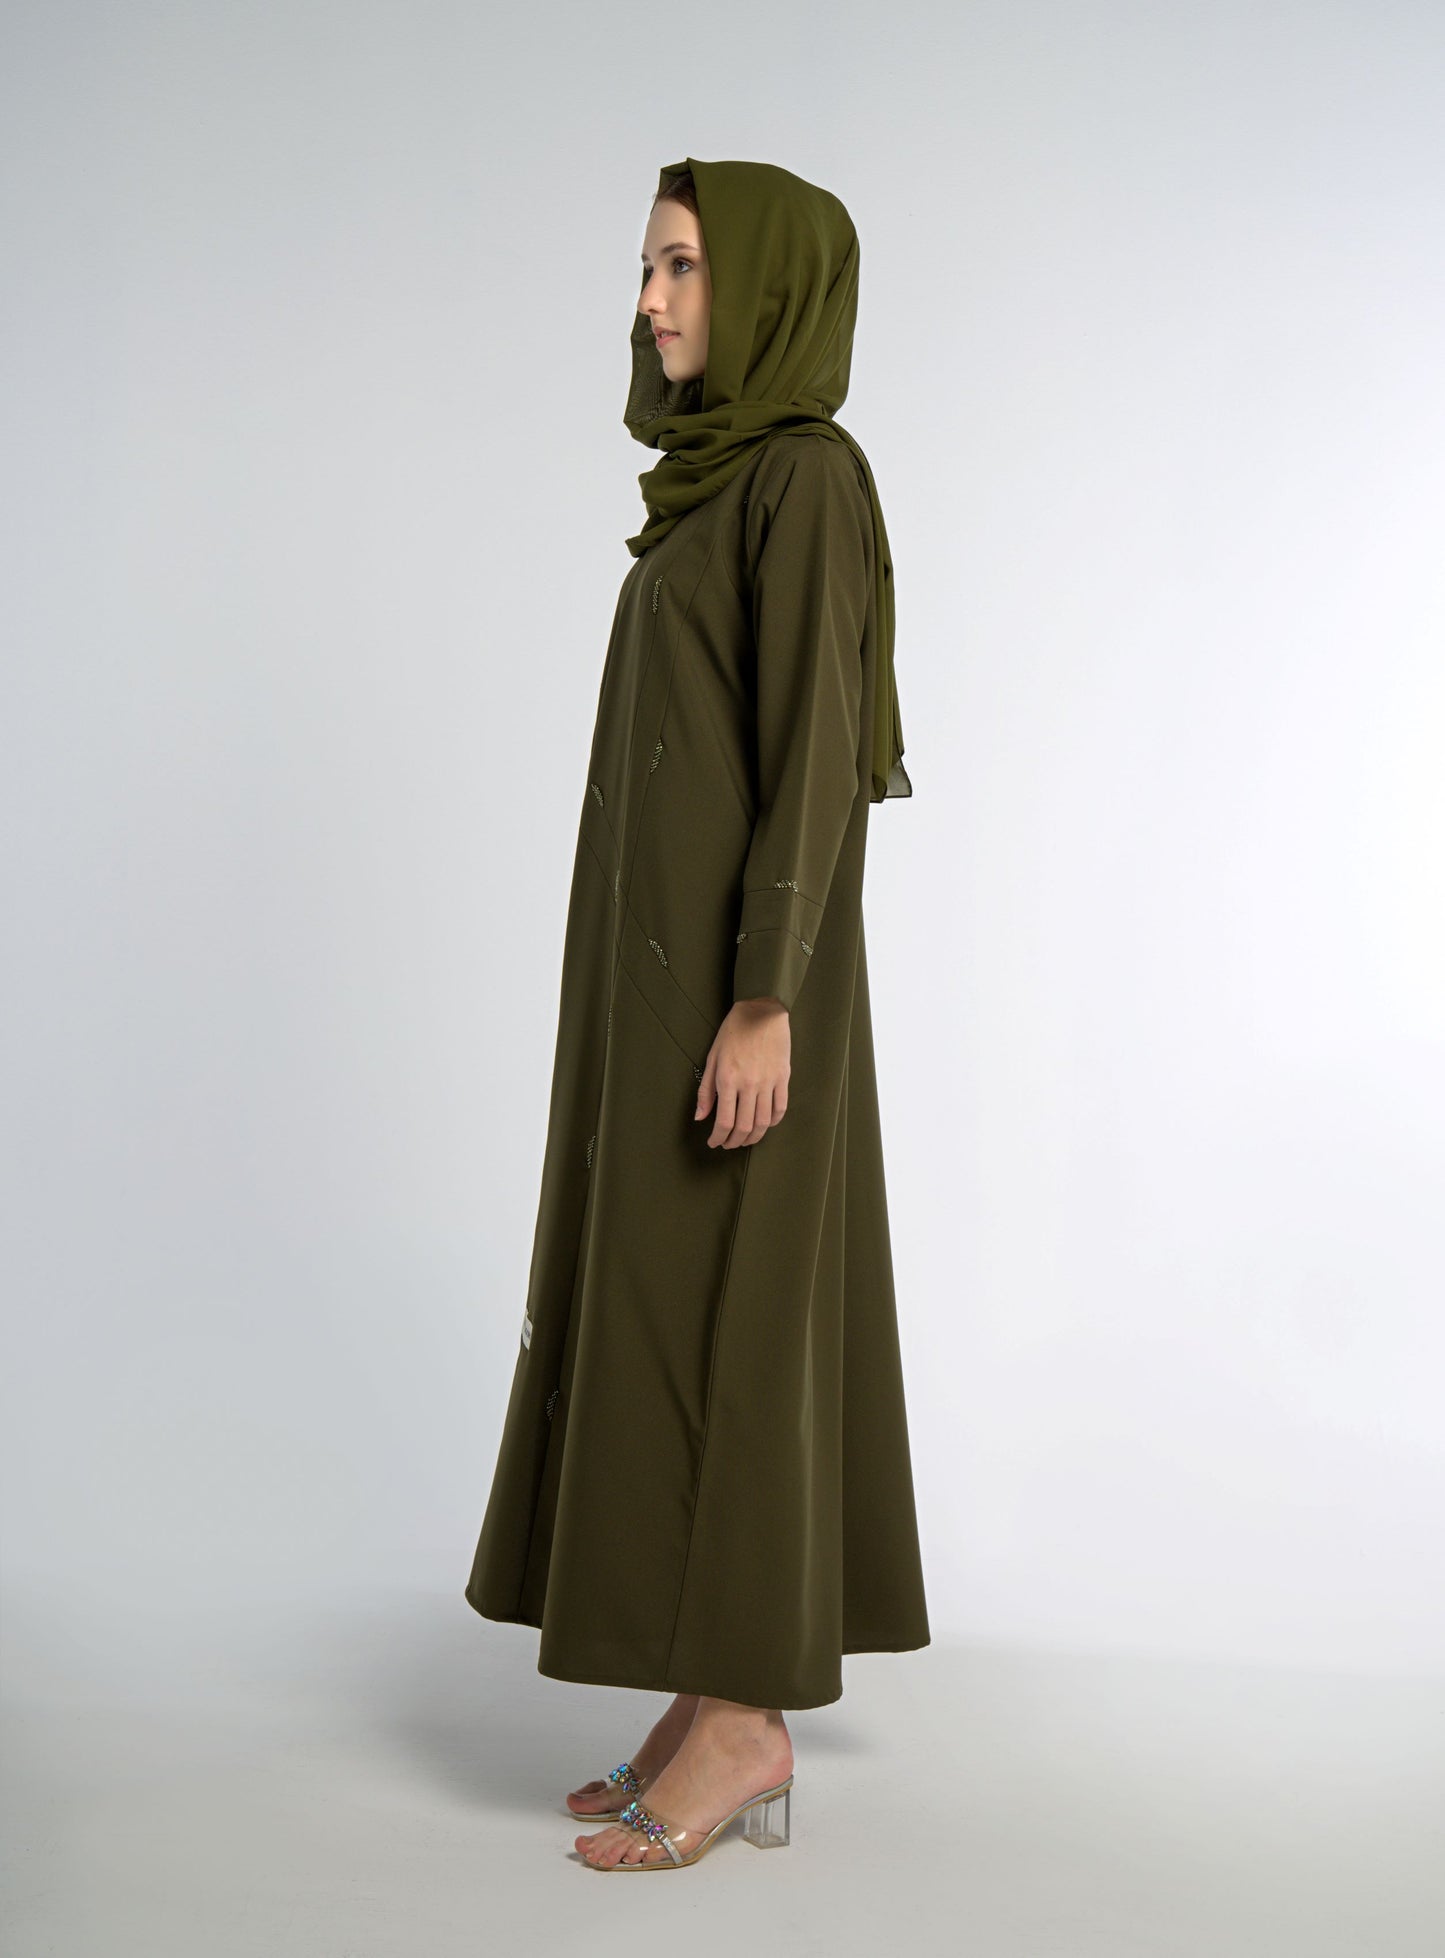 Side view of green abaya with line-patterned beaded embellishments